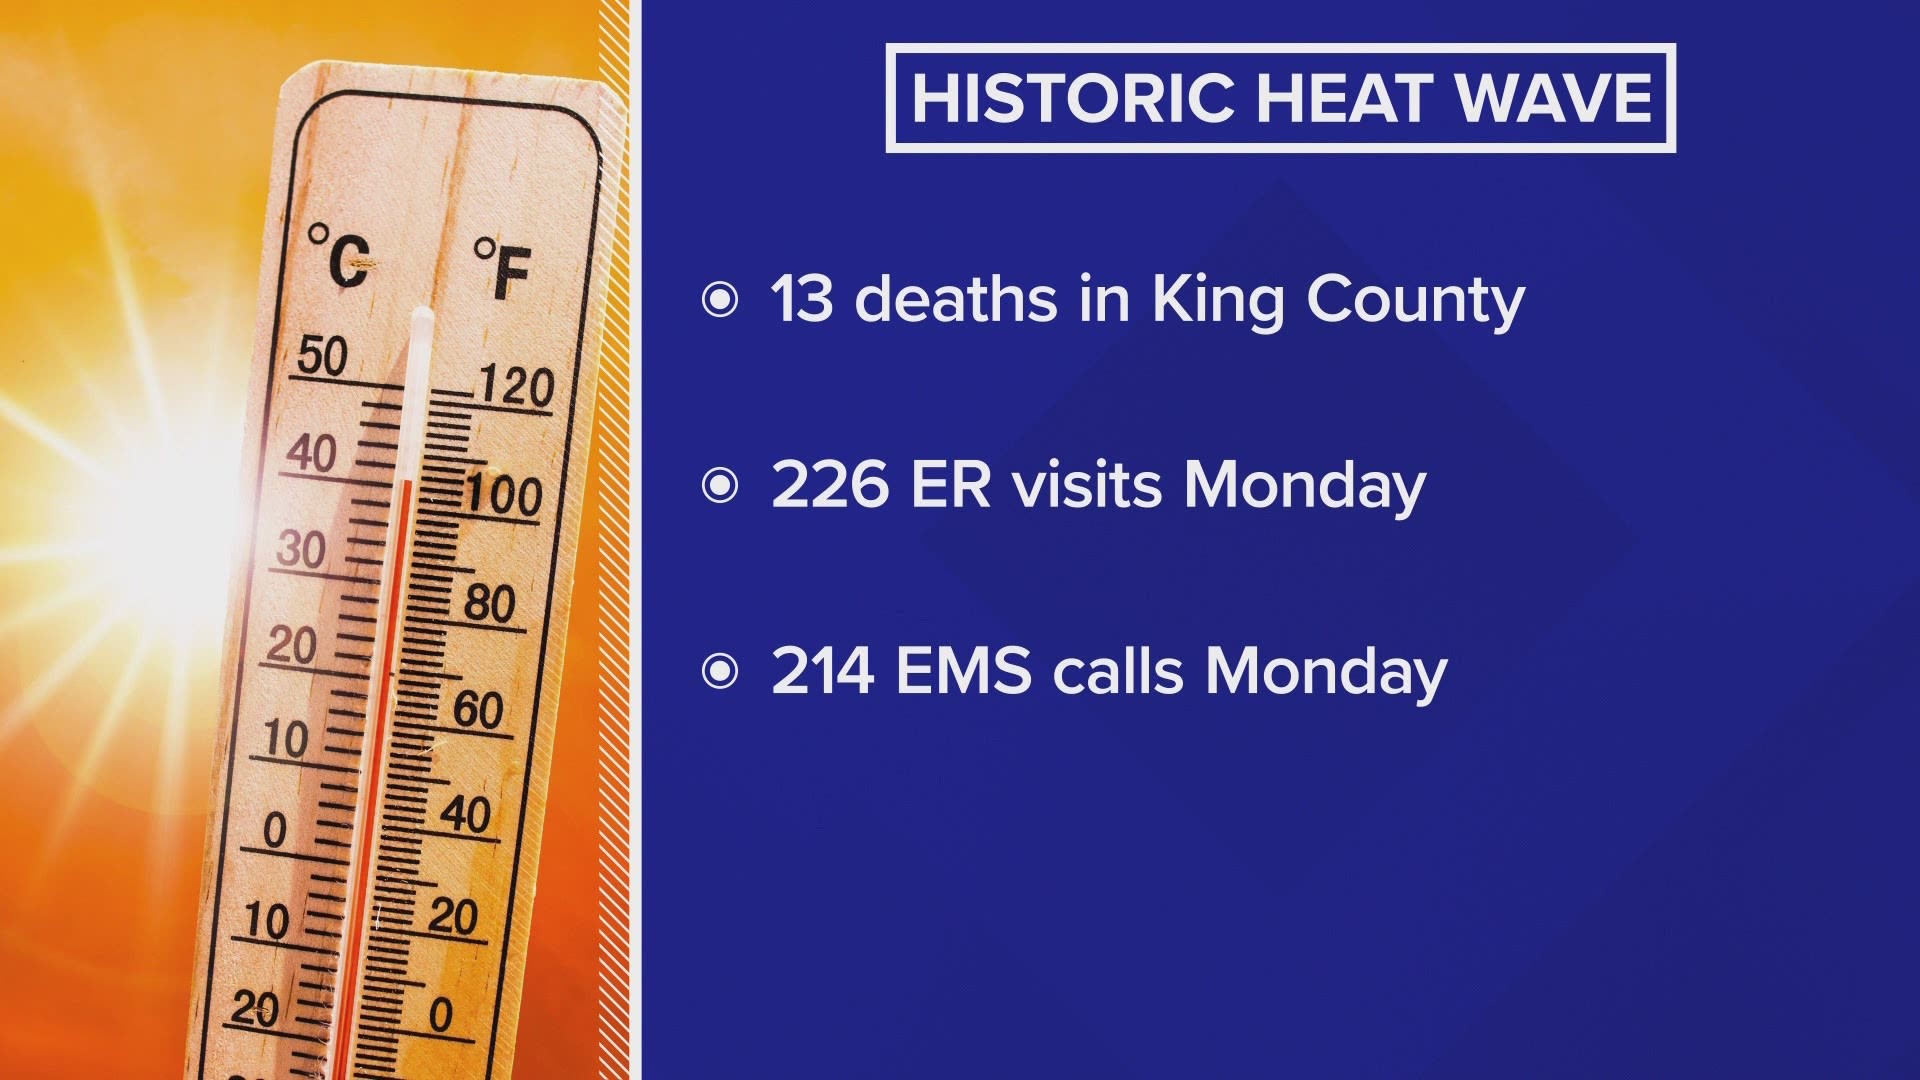 Thirteen people died in King County from heat-related illnesses, and more than 200 others visited emergency departments for problems related to the heat.